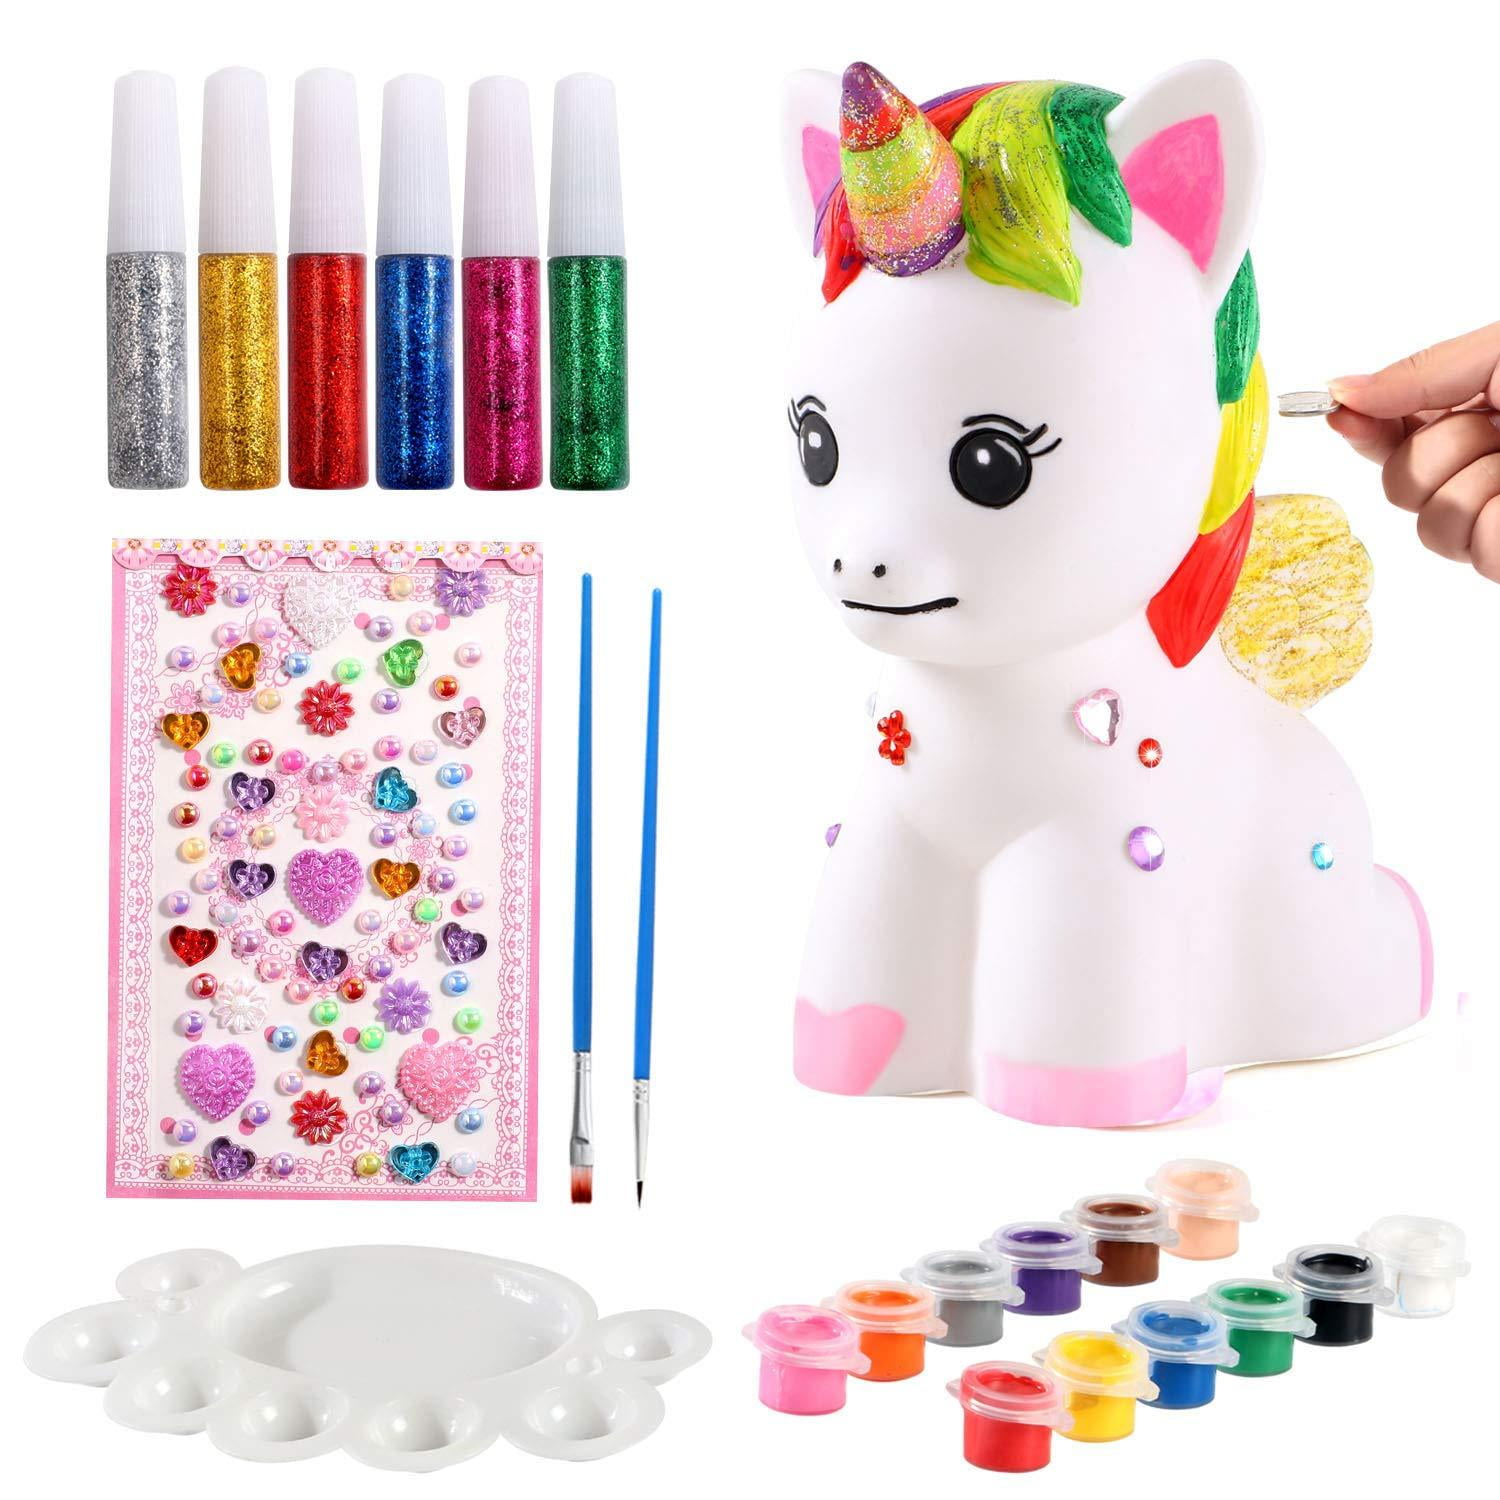 Paint It Yourself Ceramic DOG Piggy Bank Kit With Paints & Brush Supplies NEW 